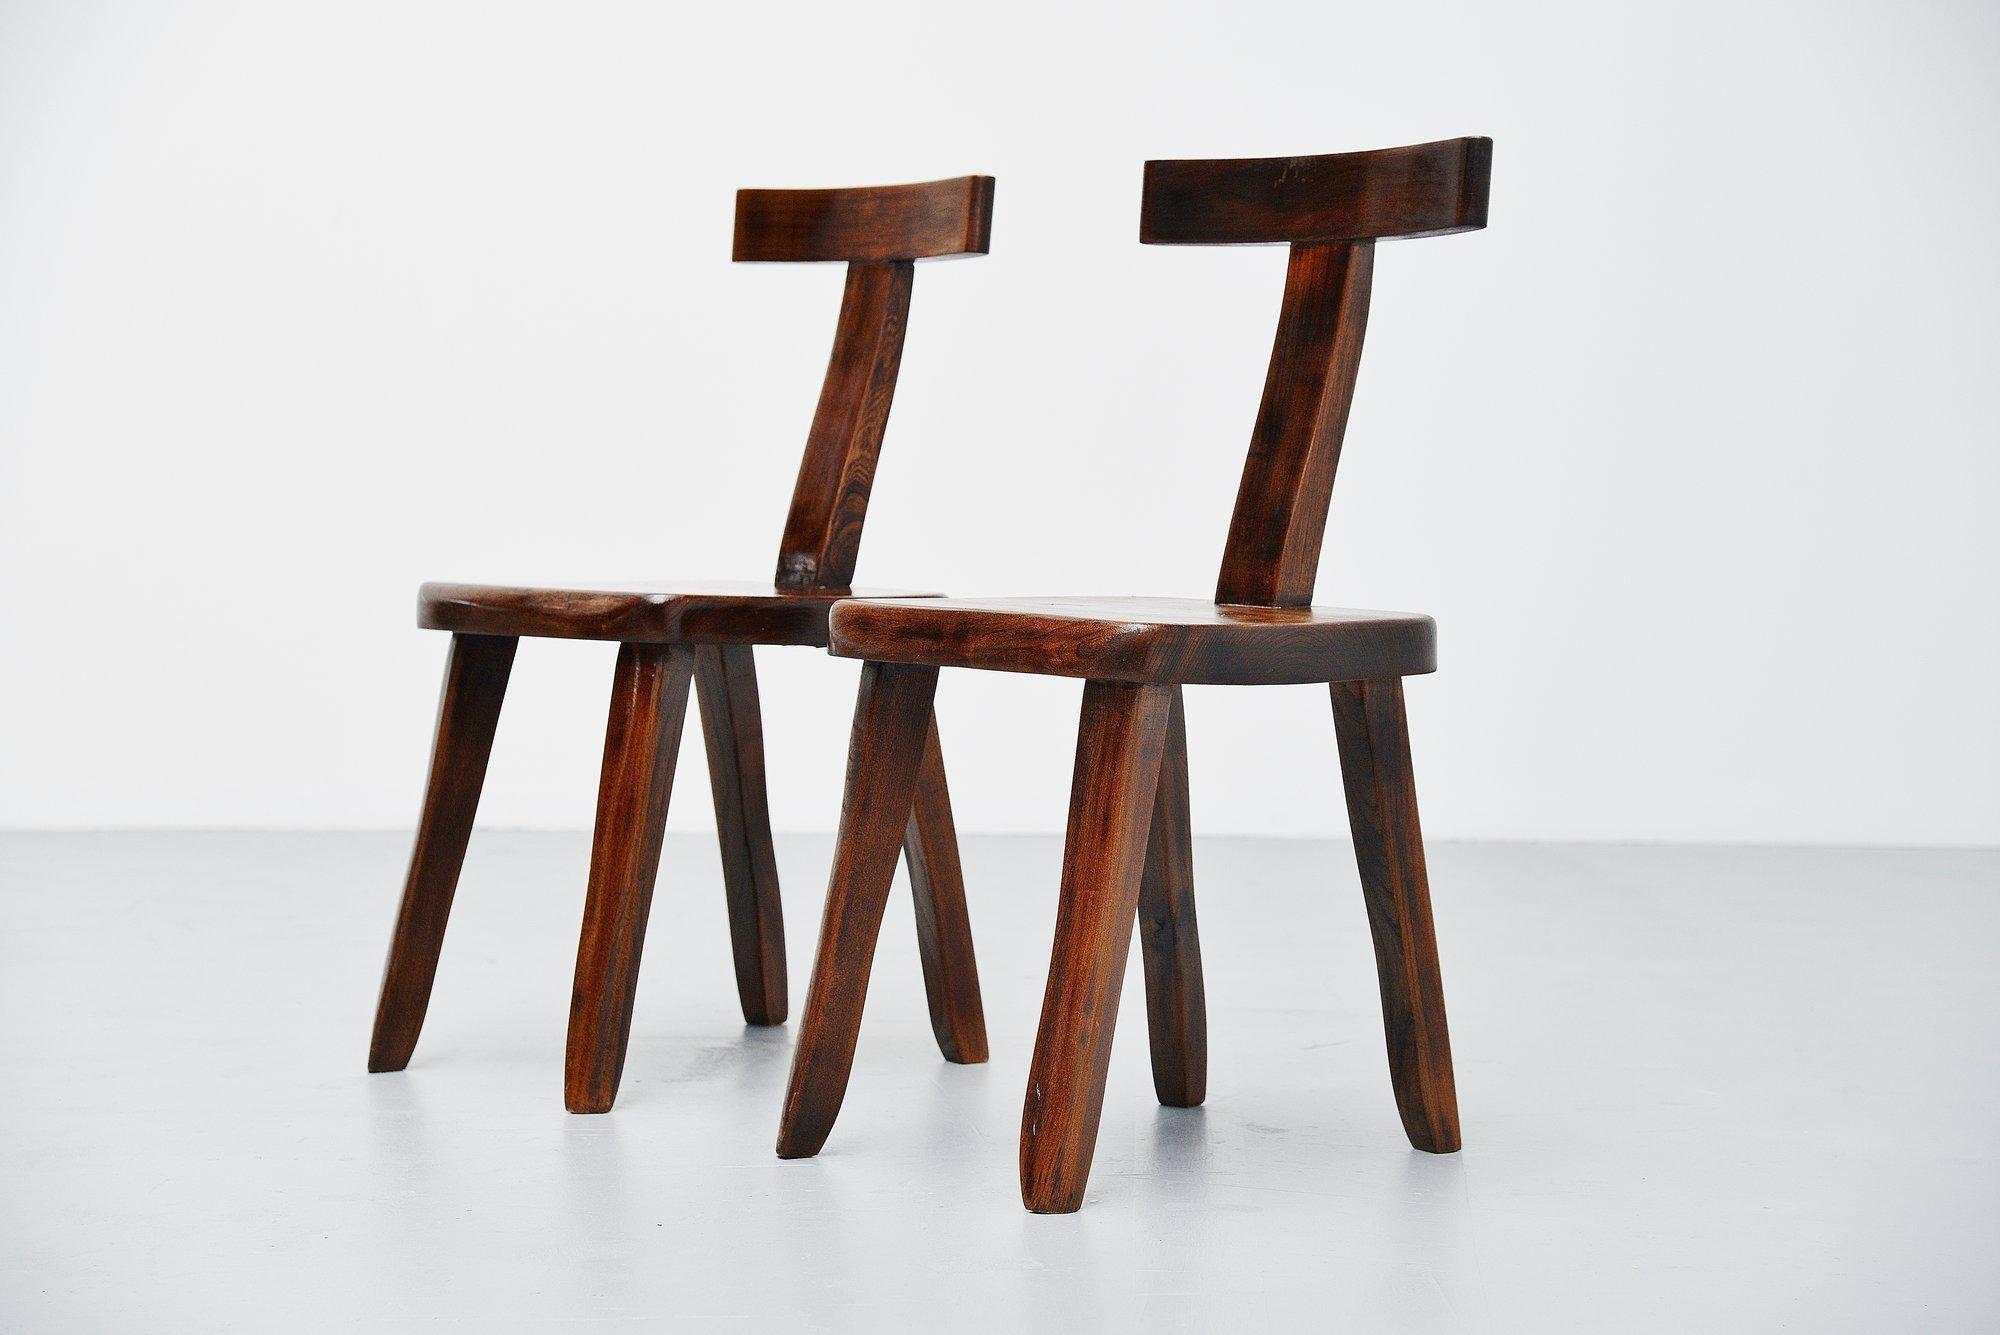 Stained Olavi Hanninen Side Chairs, Finland, 1950